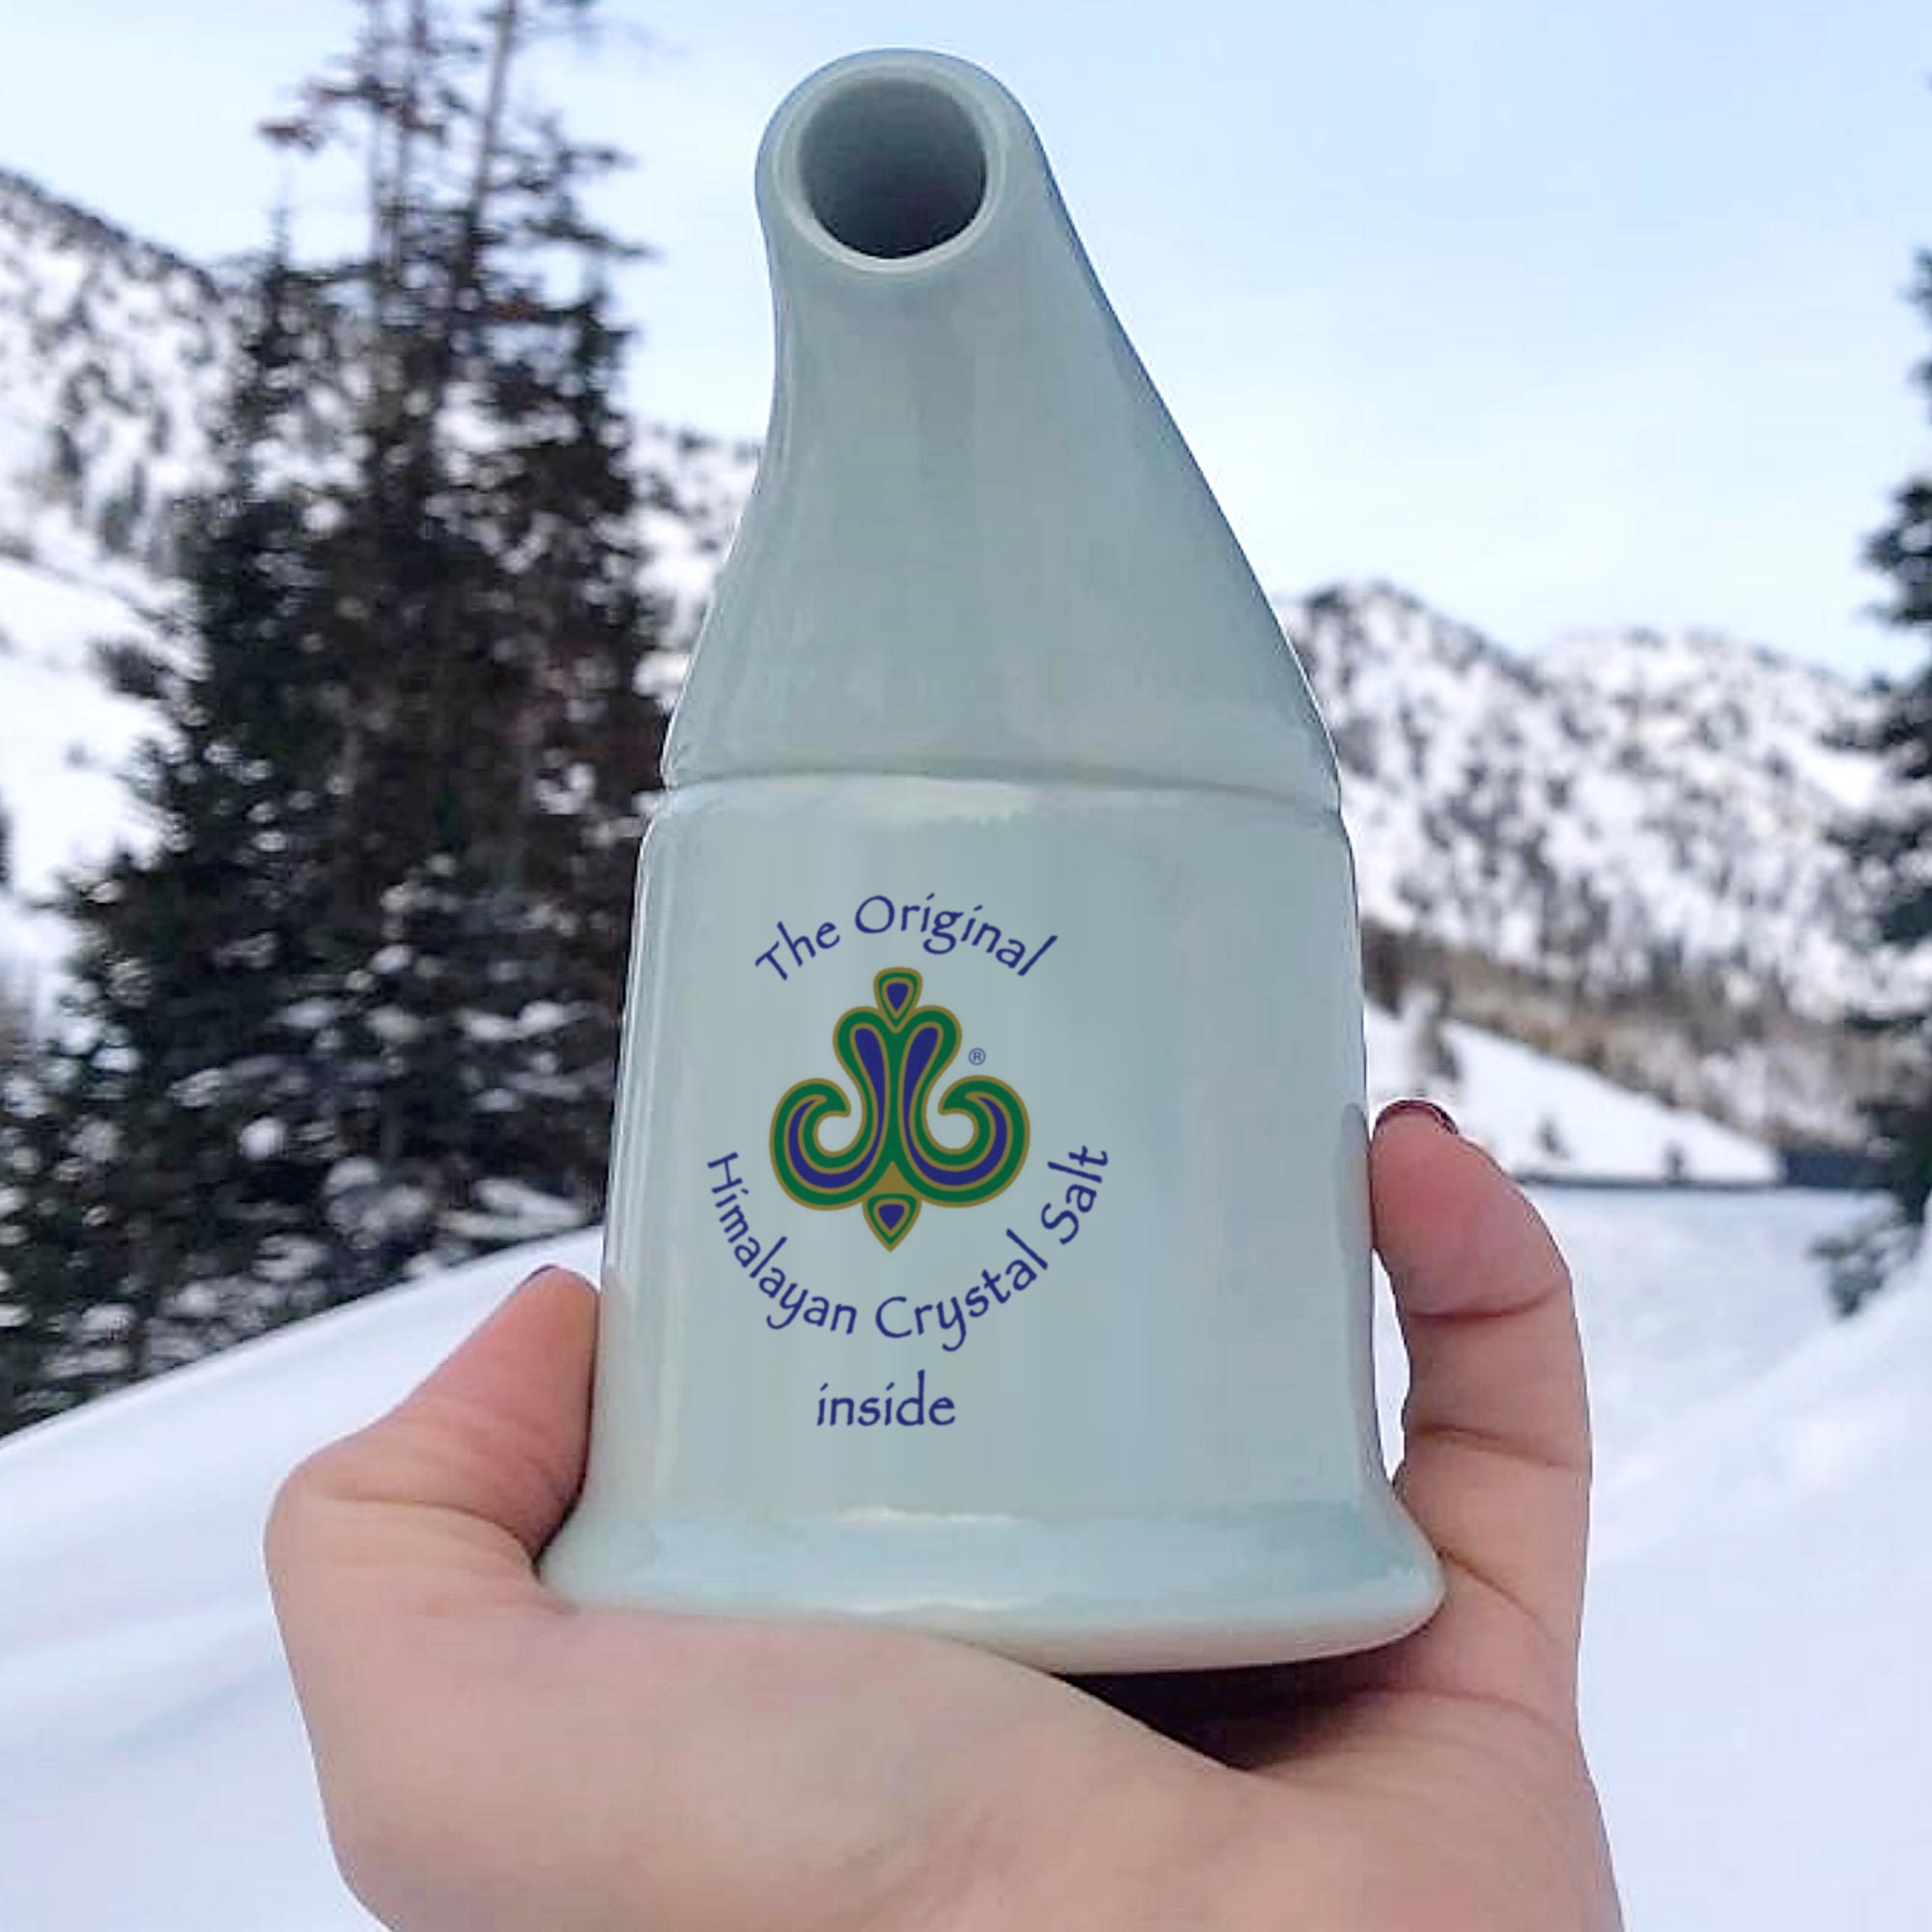 Original Himalayan Crystal Salt Inhaler off-white ceramic inhaler in white hand, with snow, trees and mountains in background